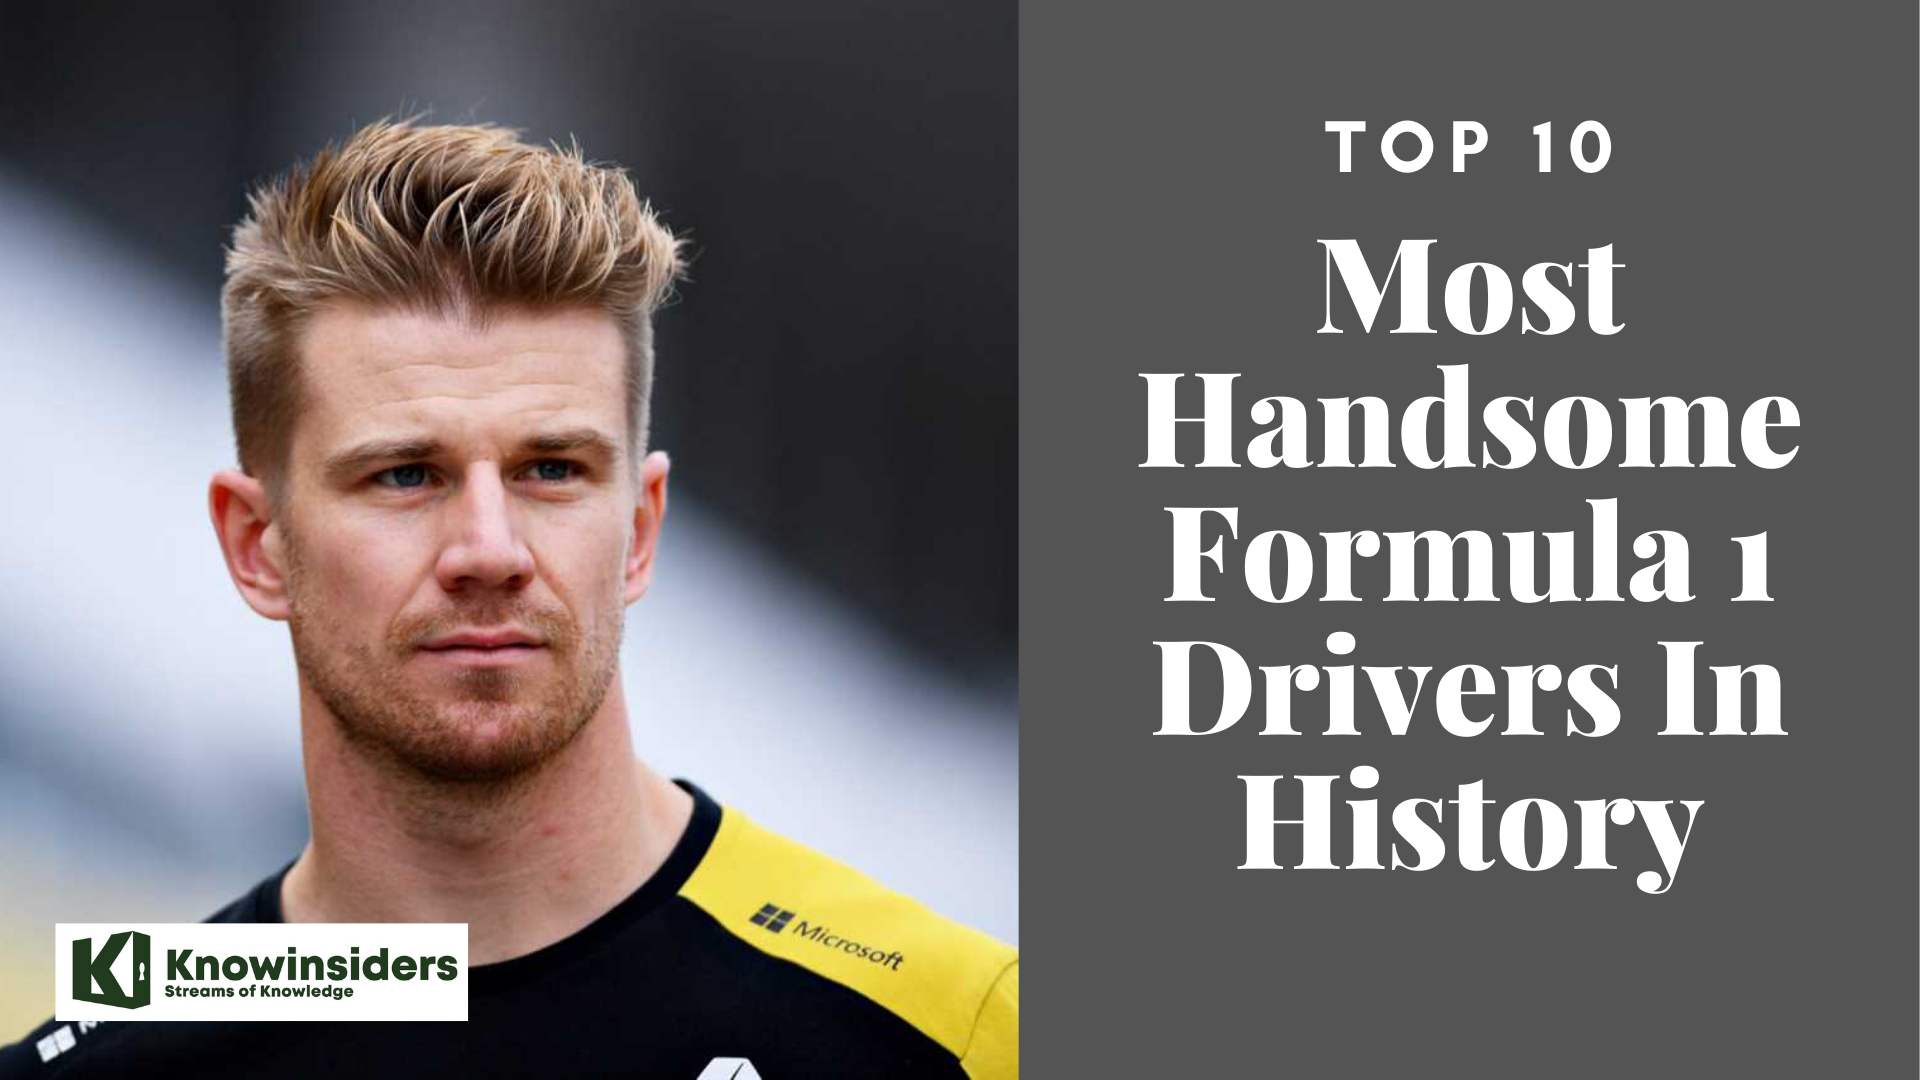 Top 10 Most Handsome Formula 1 Drivers In History